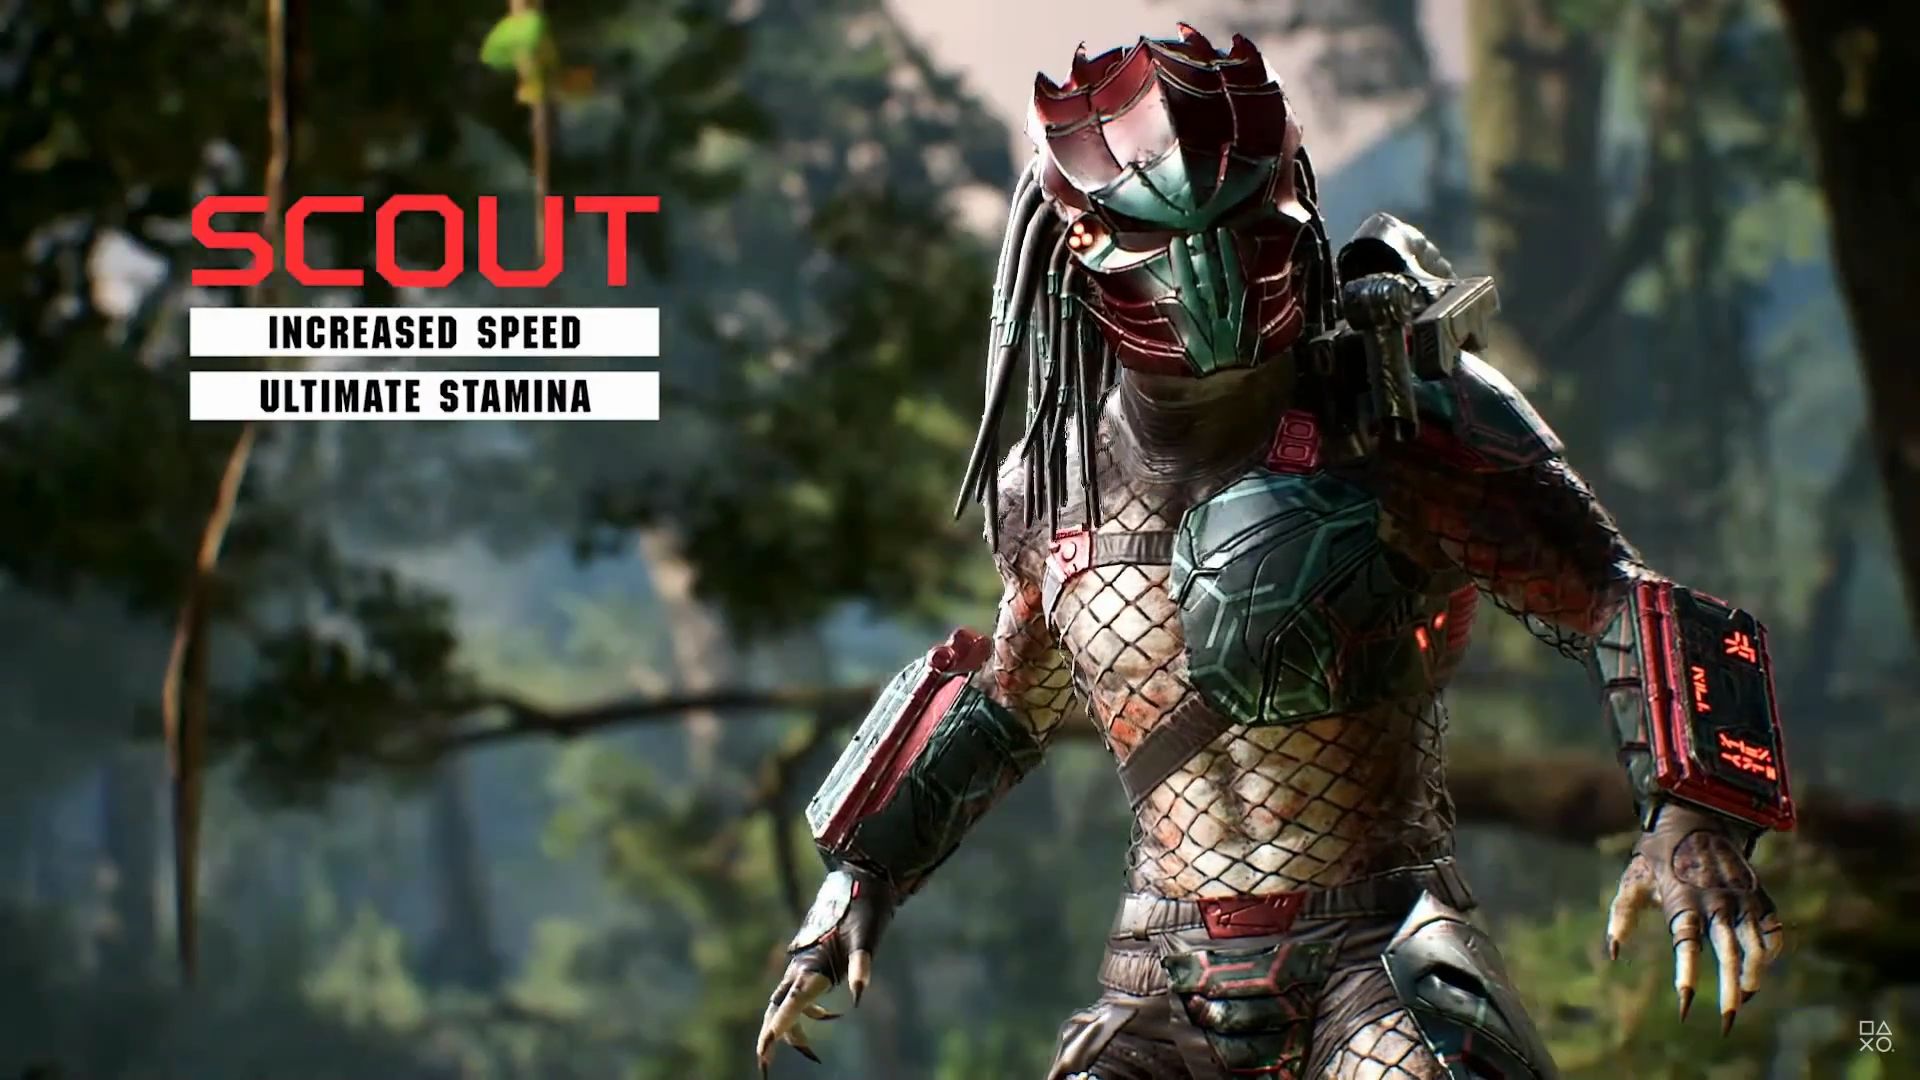 Predator: Hunting Grounds is Coming to PC & PS4 on April 24th and New Trailer!